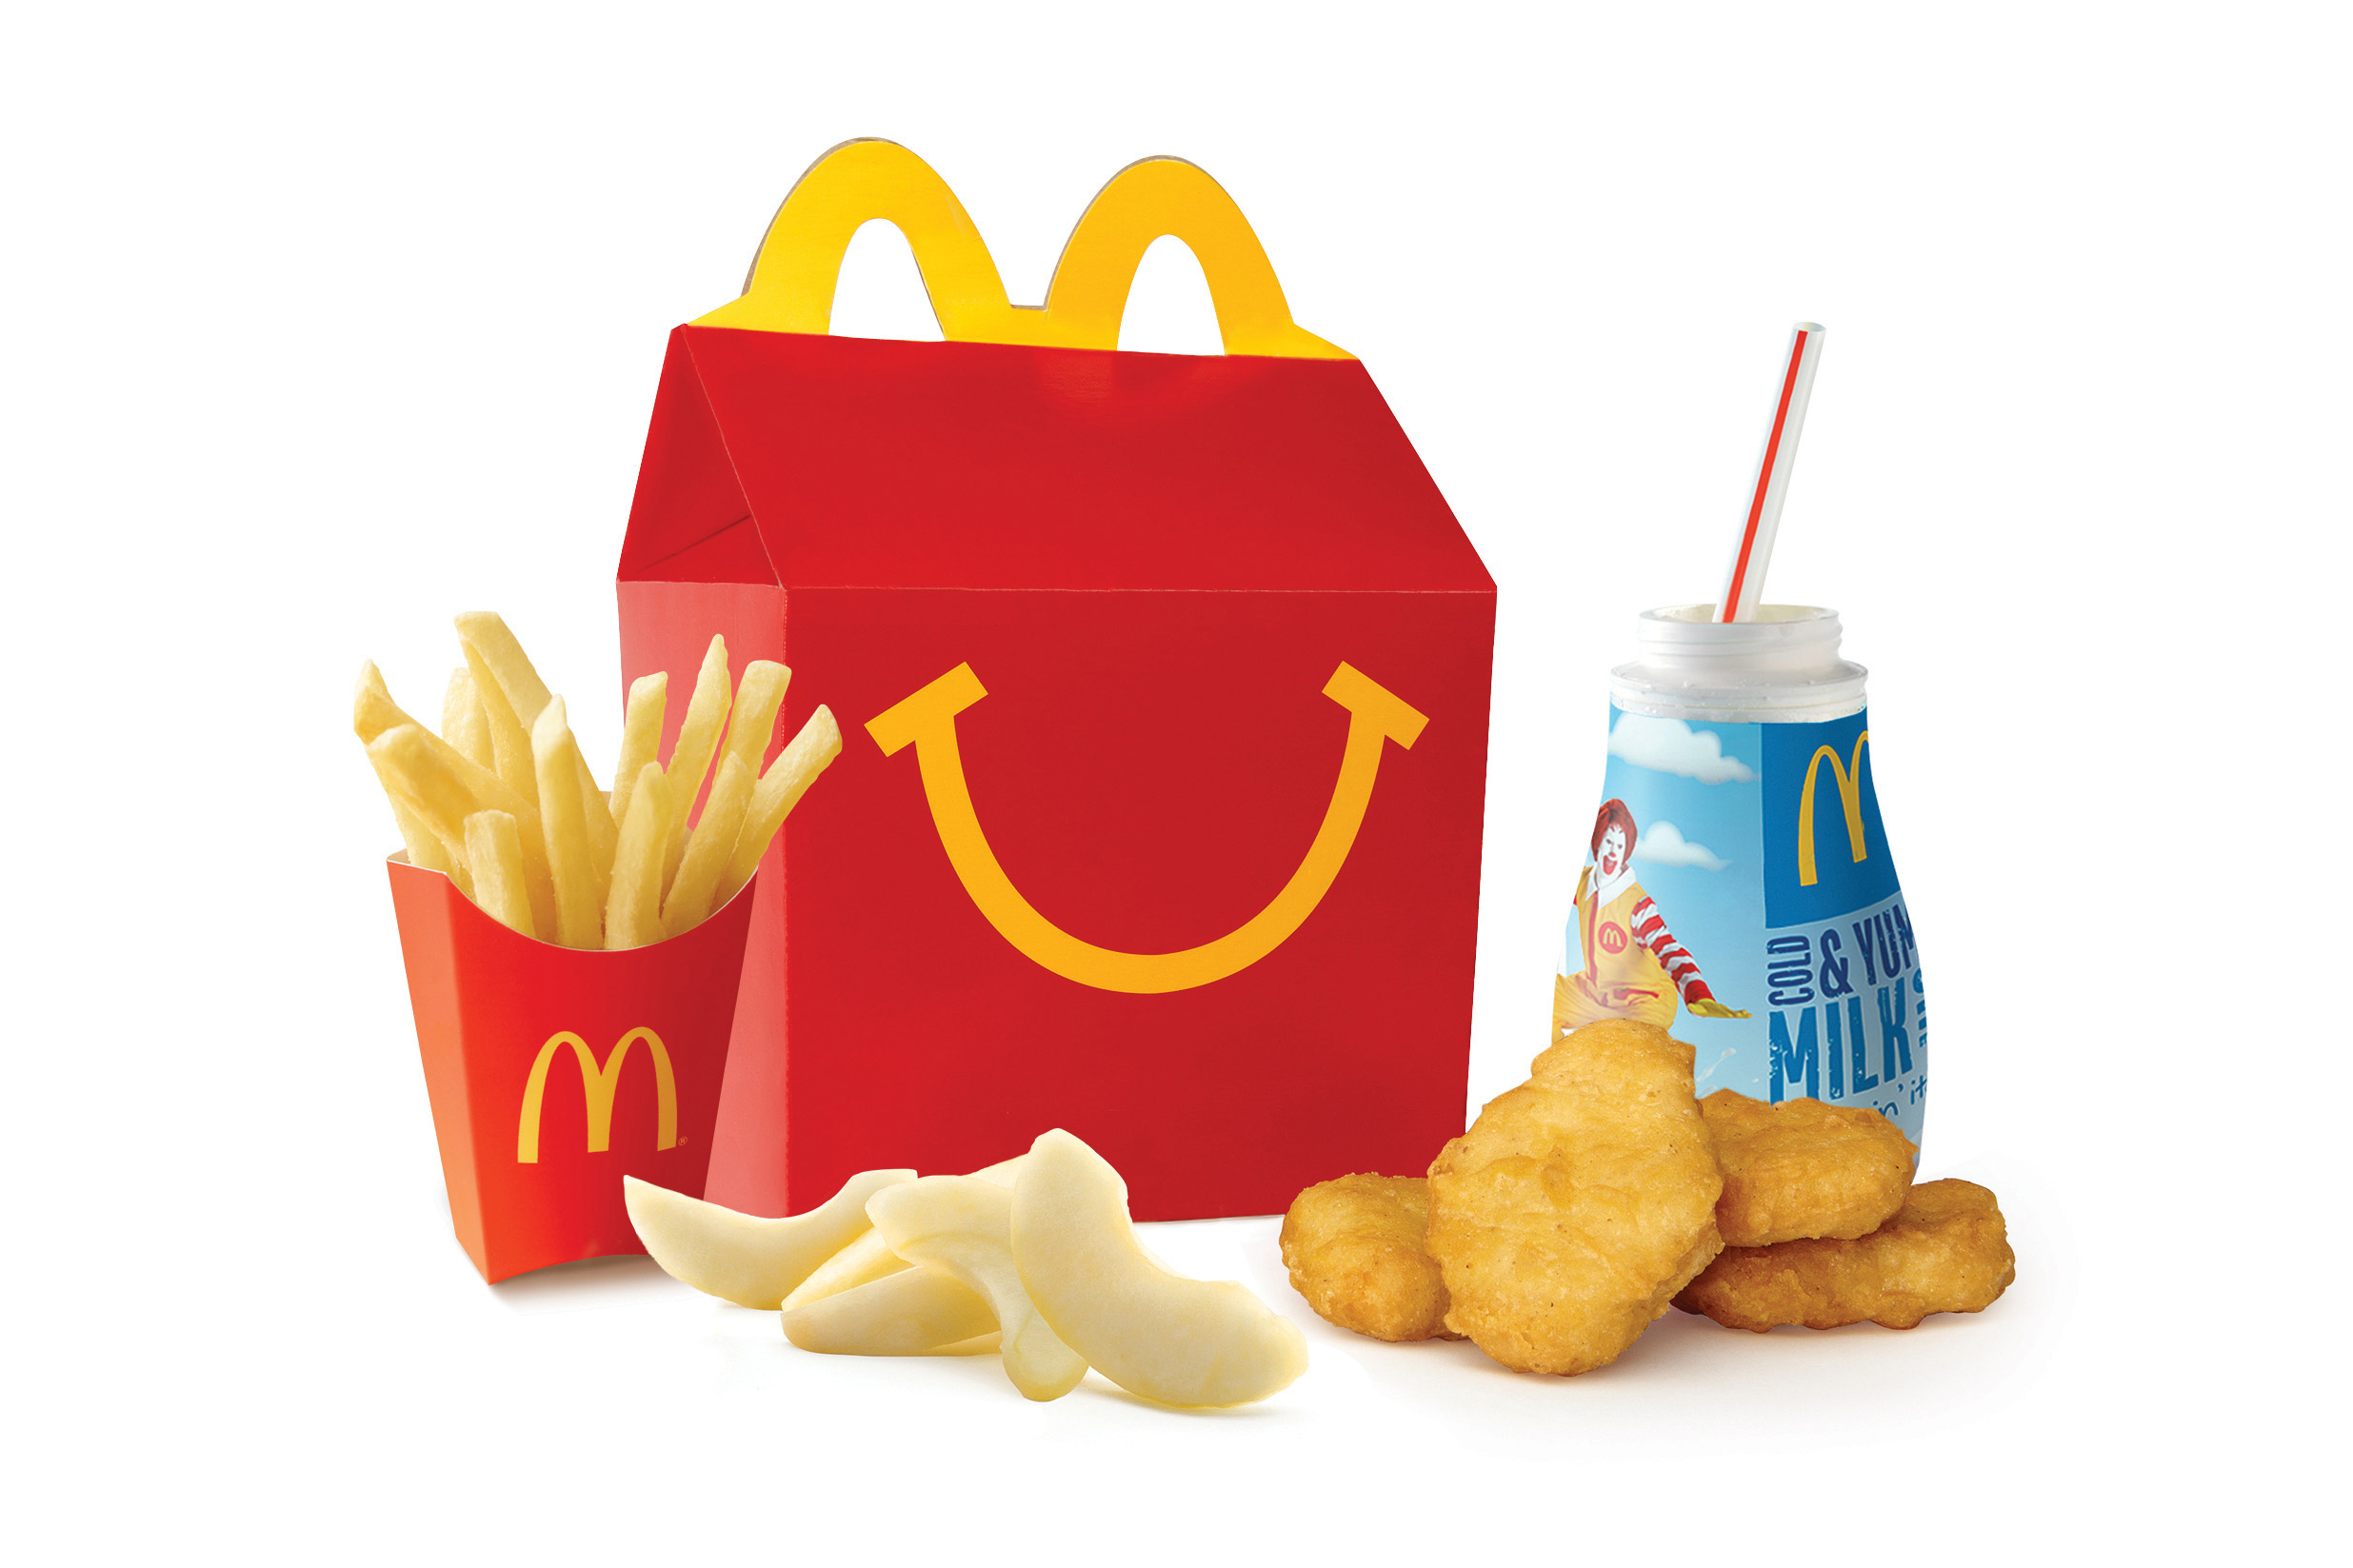 mcdonald-s-cutting-calories-in-happy-meals-2018-02-15-food-business-news